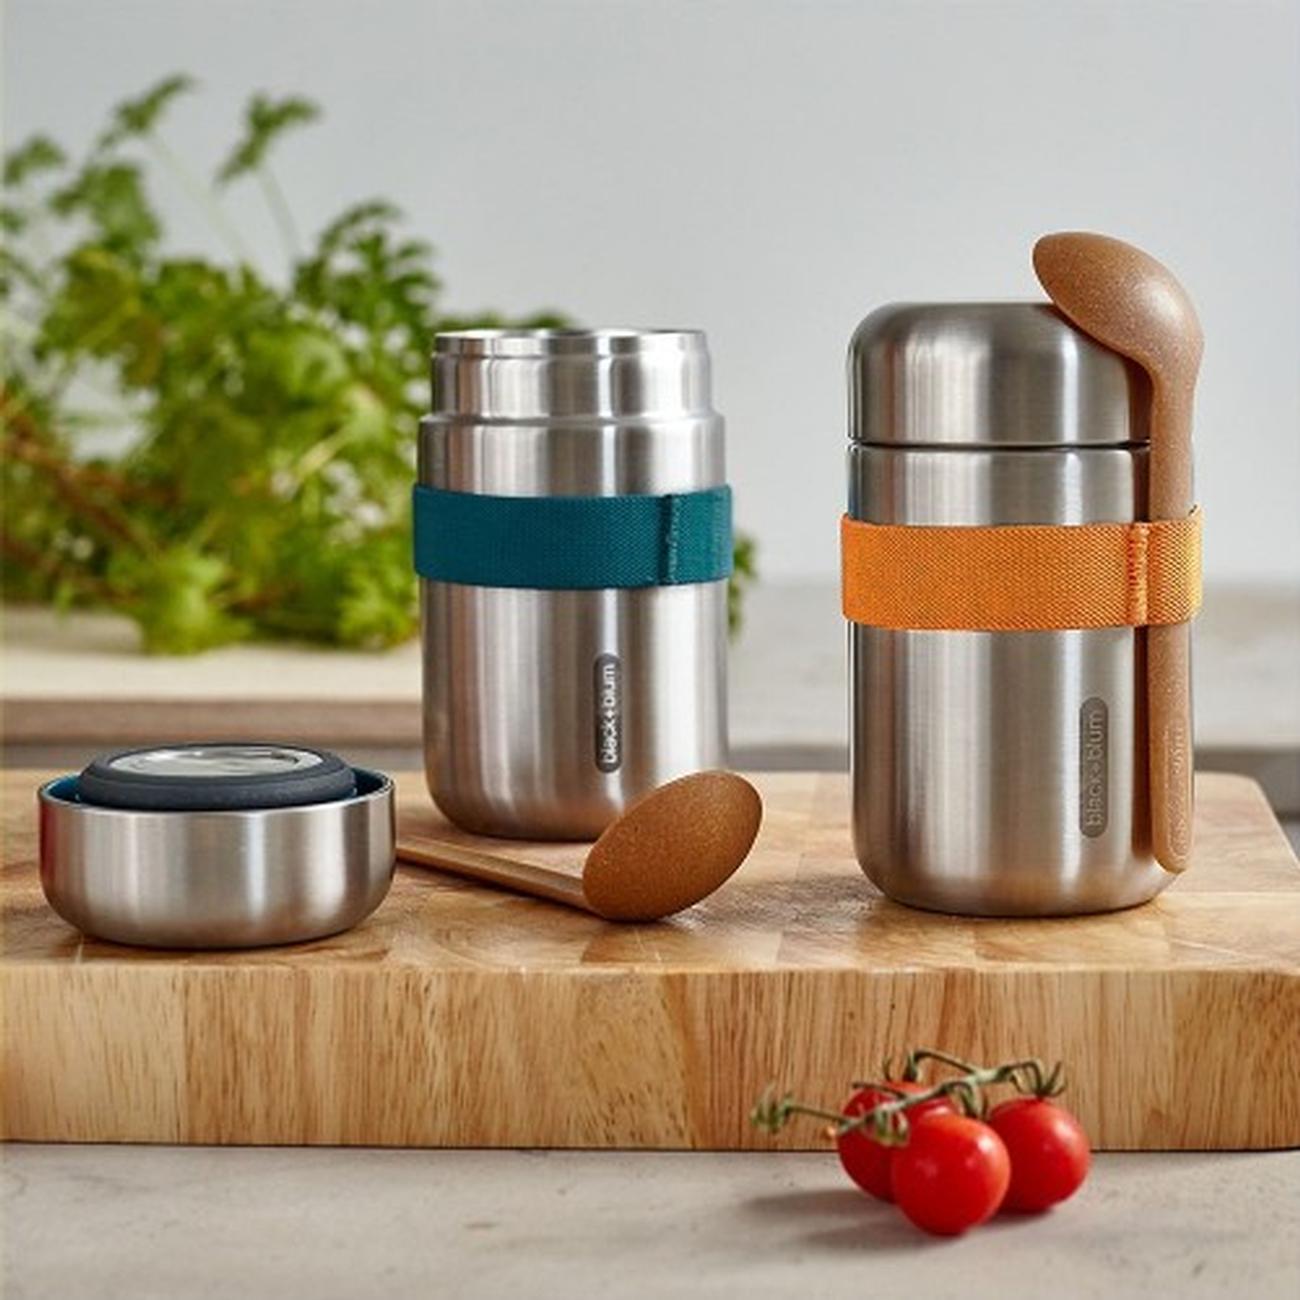 black-and-blum-stainless-steel-food-flask-orange - Black and Blum Stainless Steel Food Flask Orange